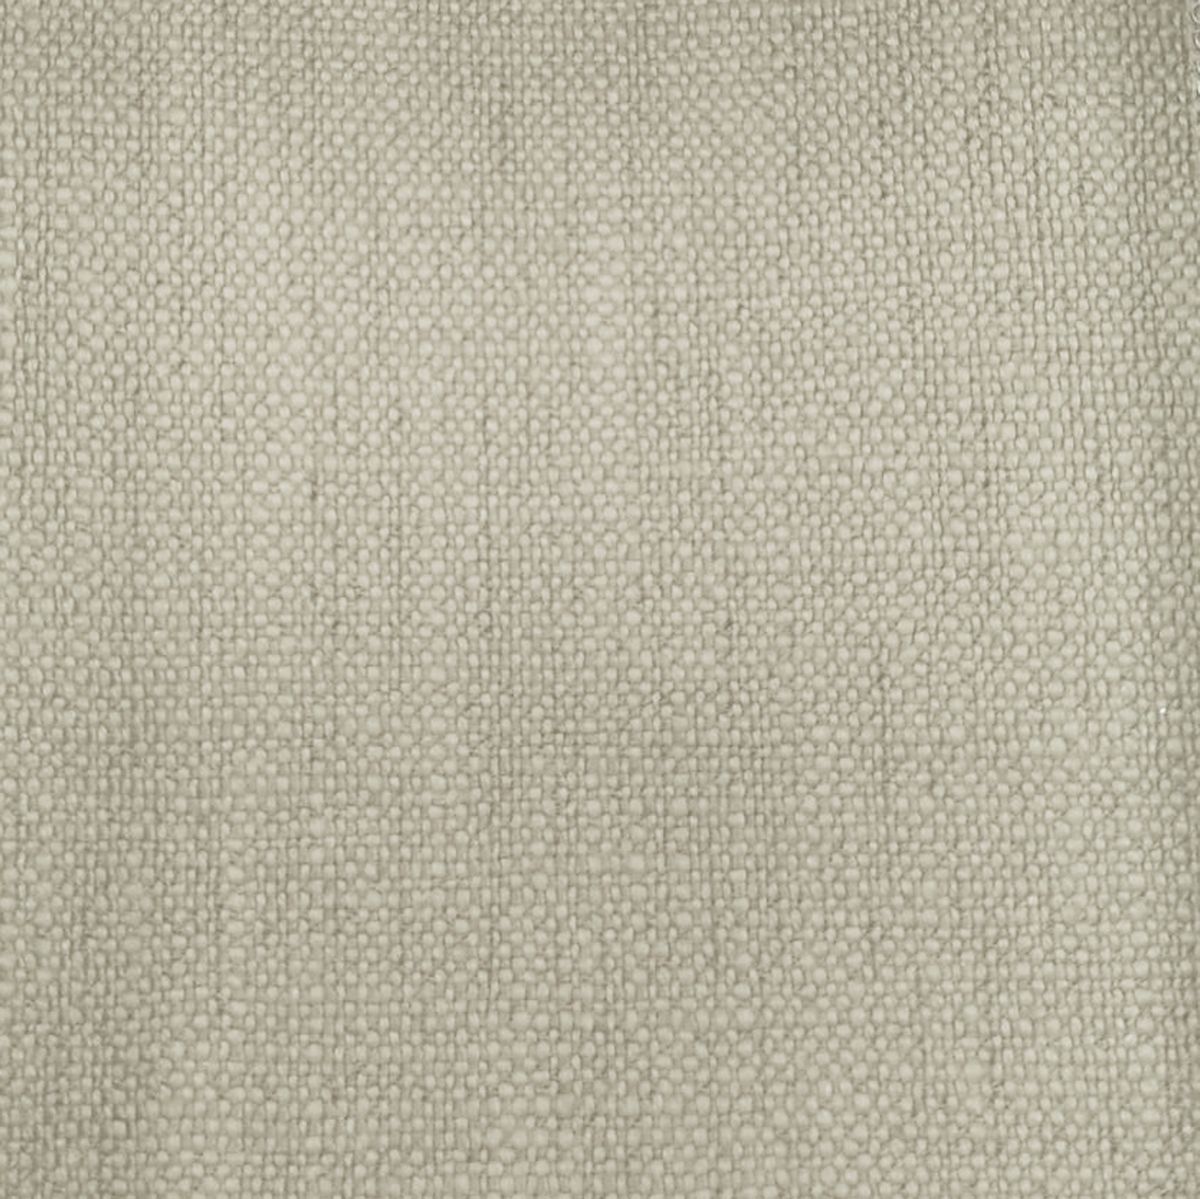 Trento Putty Fabric by Voyage Maison